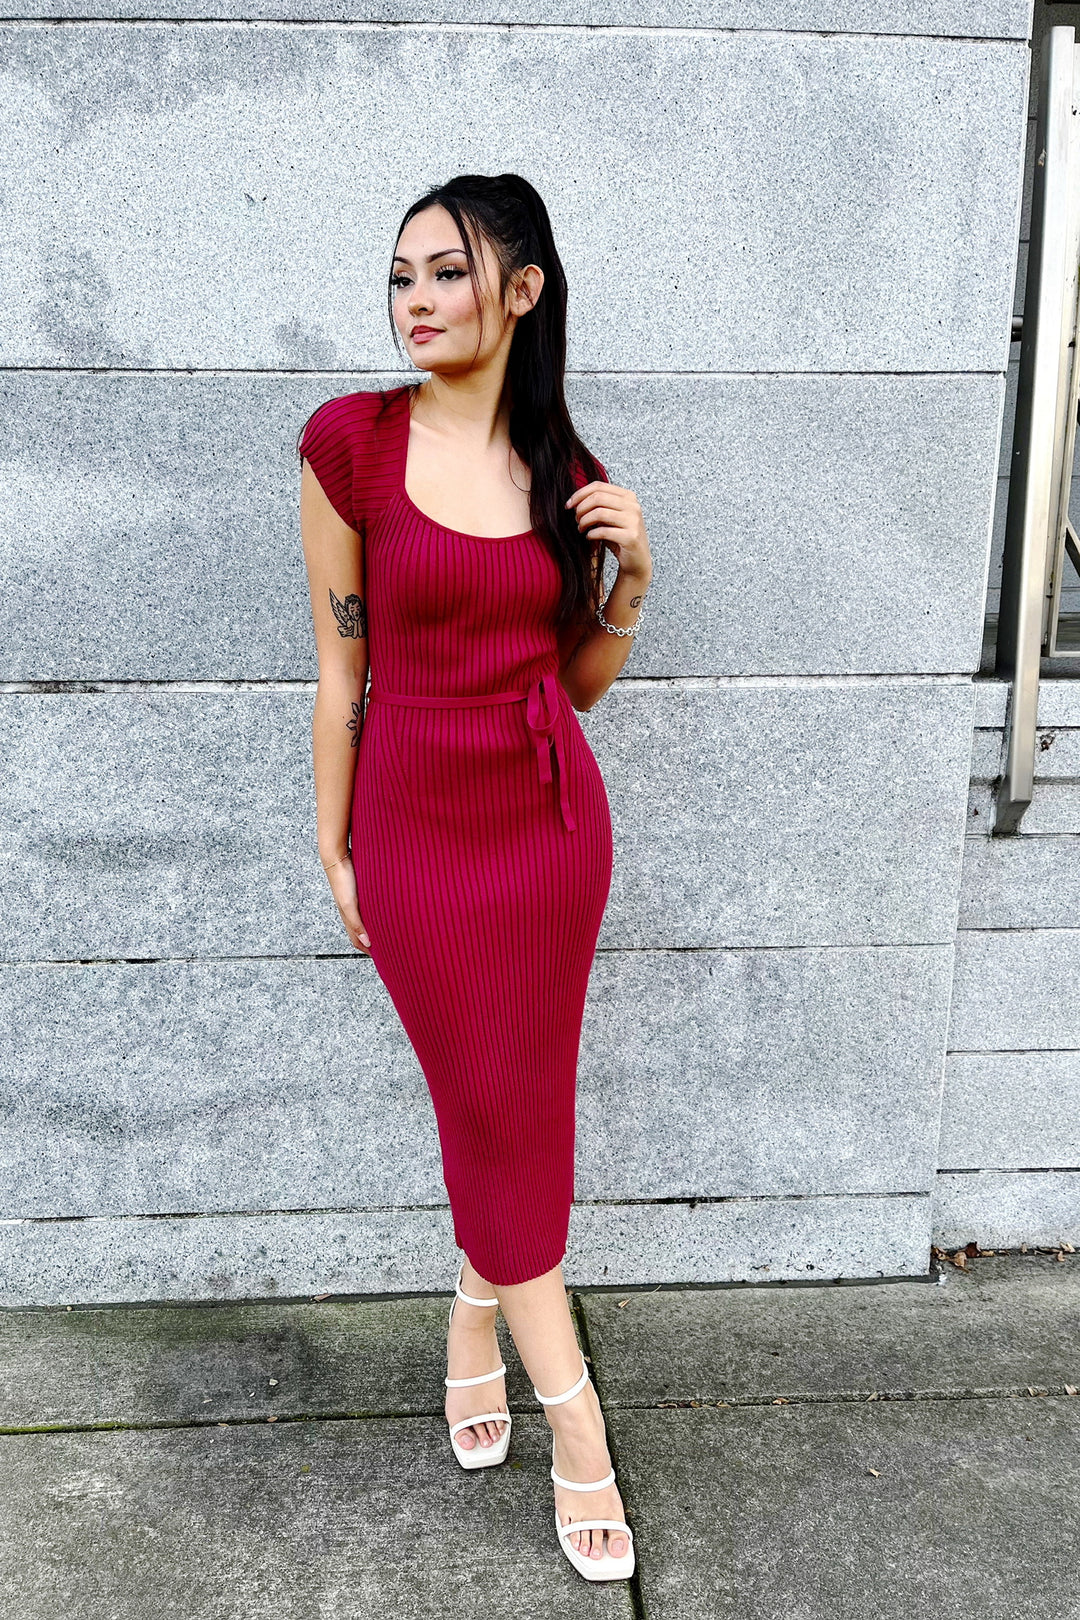 The Champagne Wishes Red Ribbed Midi Dress